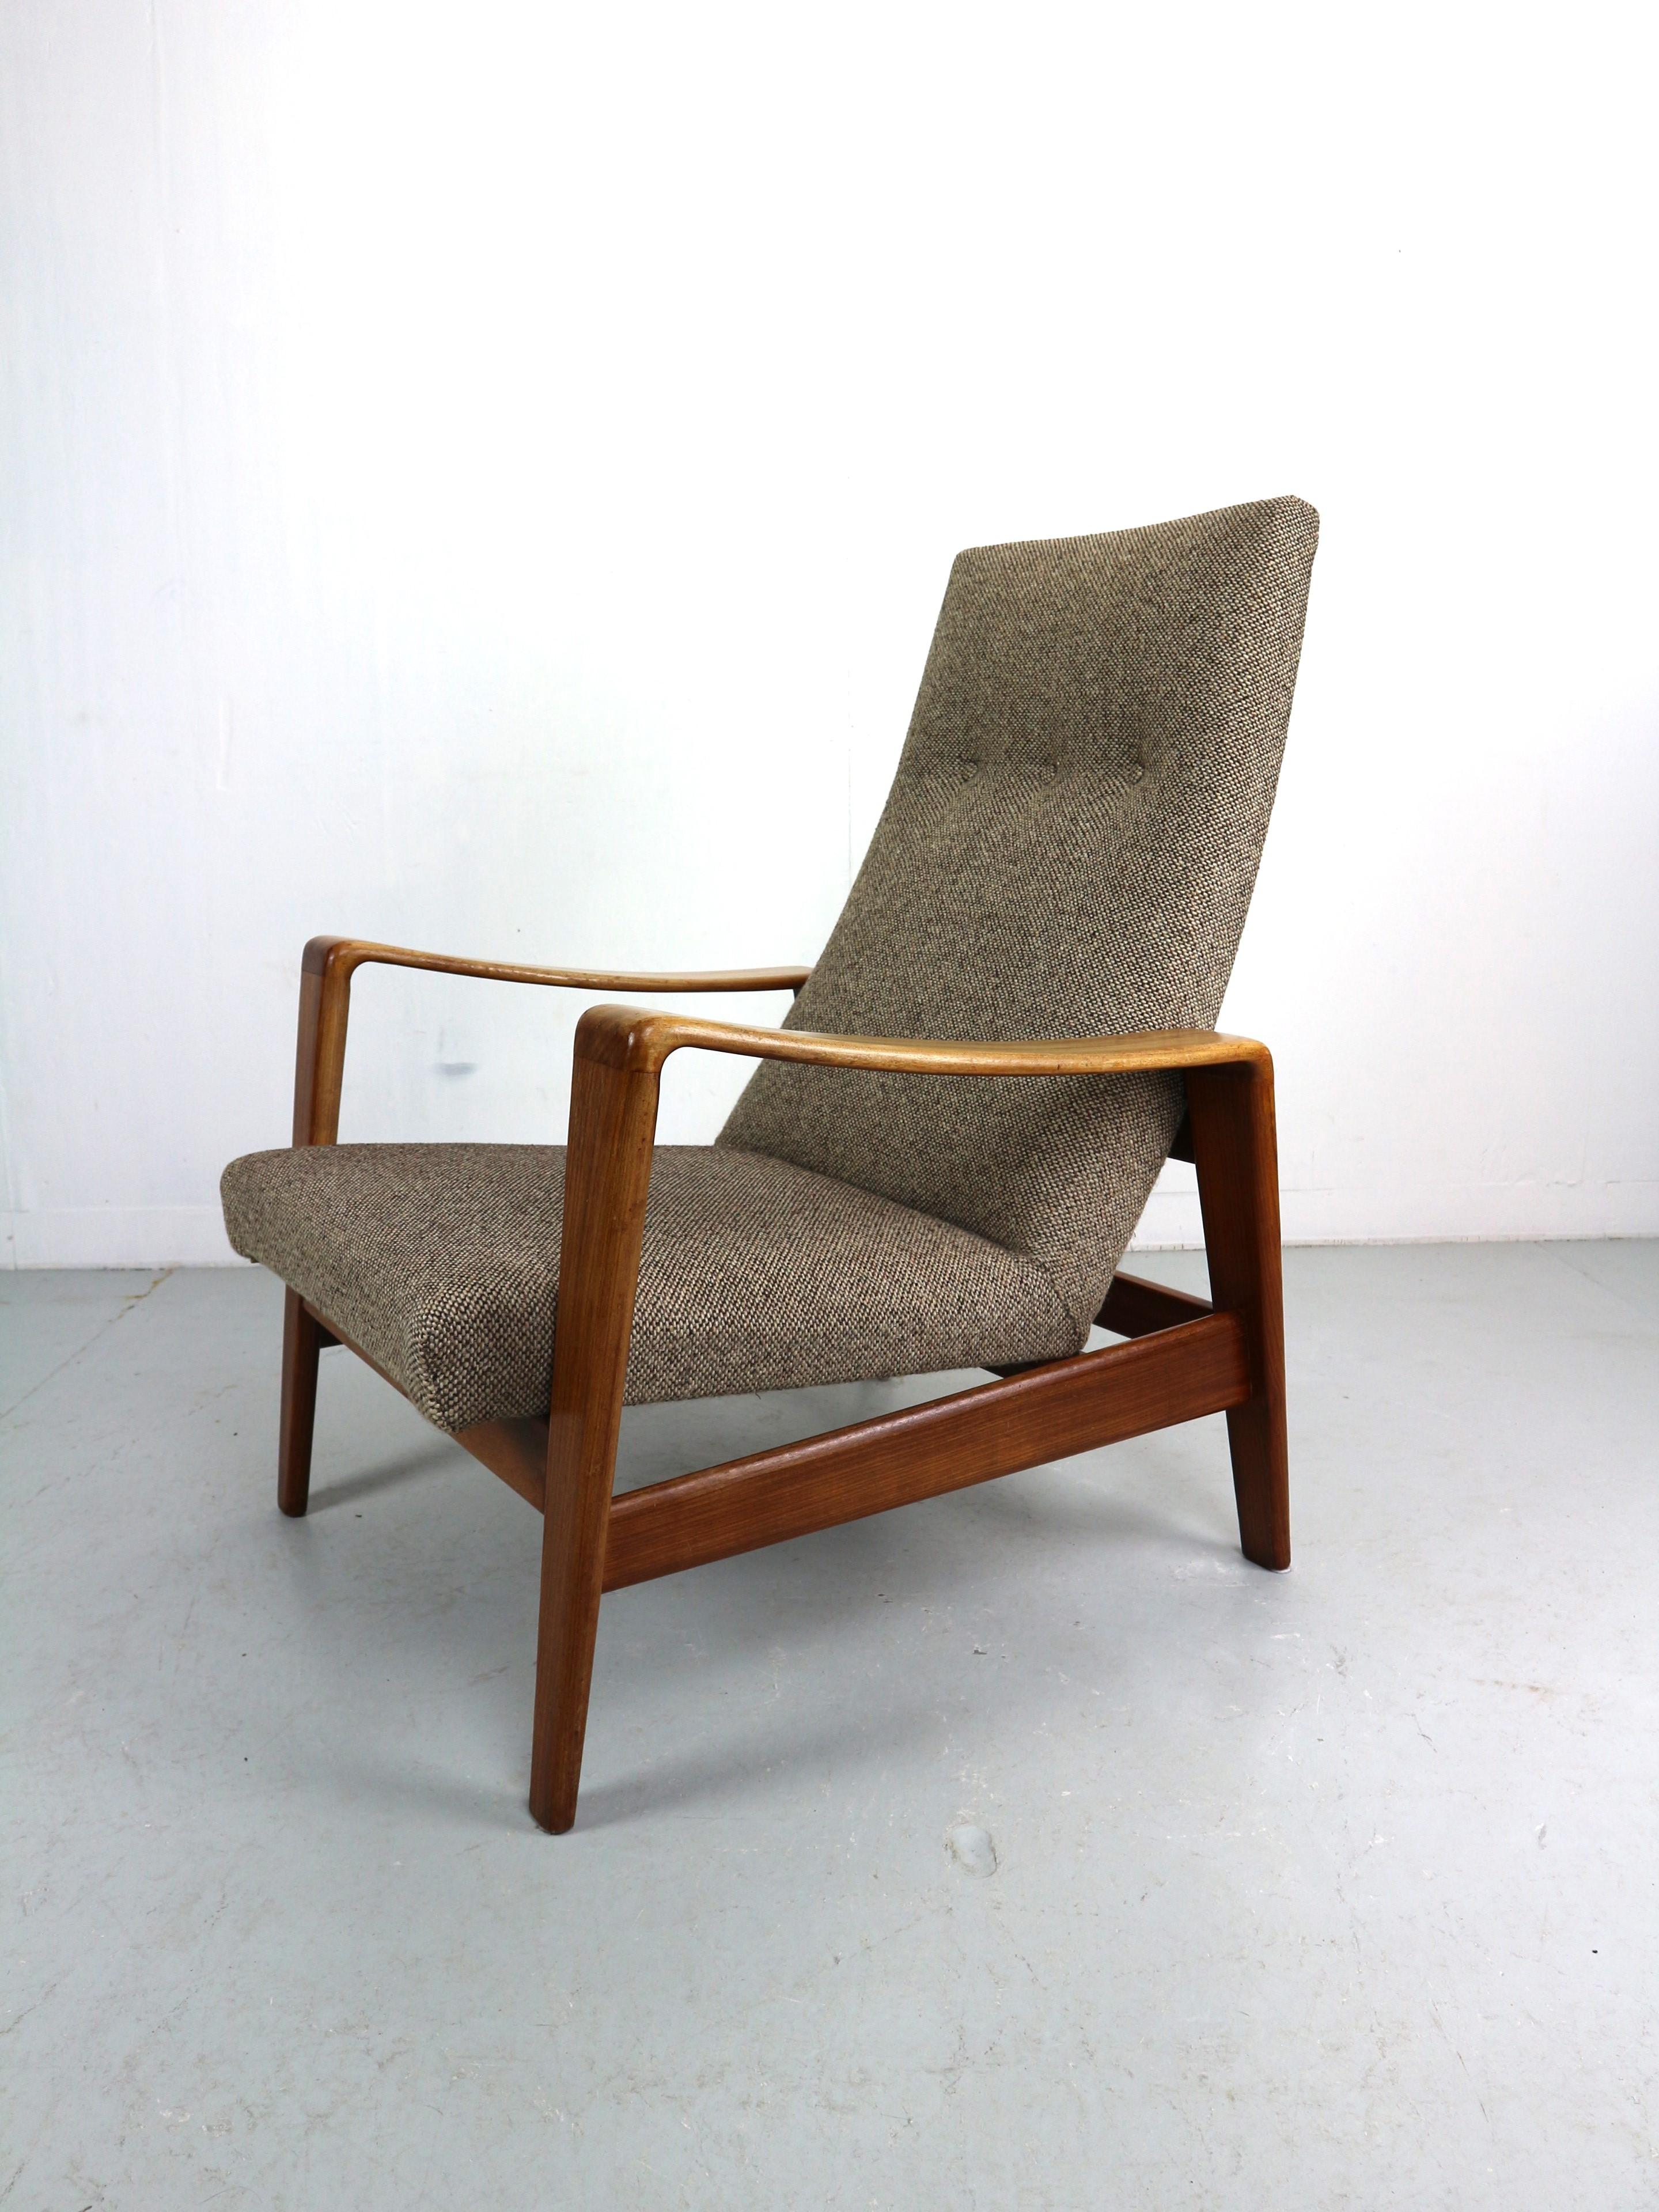 Easy chair designed by Arne Wahl Iversen, manufactured by Komfort Denmark 1960. These chairs have solid teak wooden frames and original light brown upholstery. These organic and dynamic shaped chairs look great in every livingroom. Comfortable easy